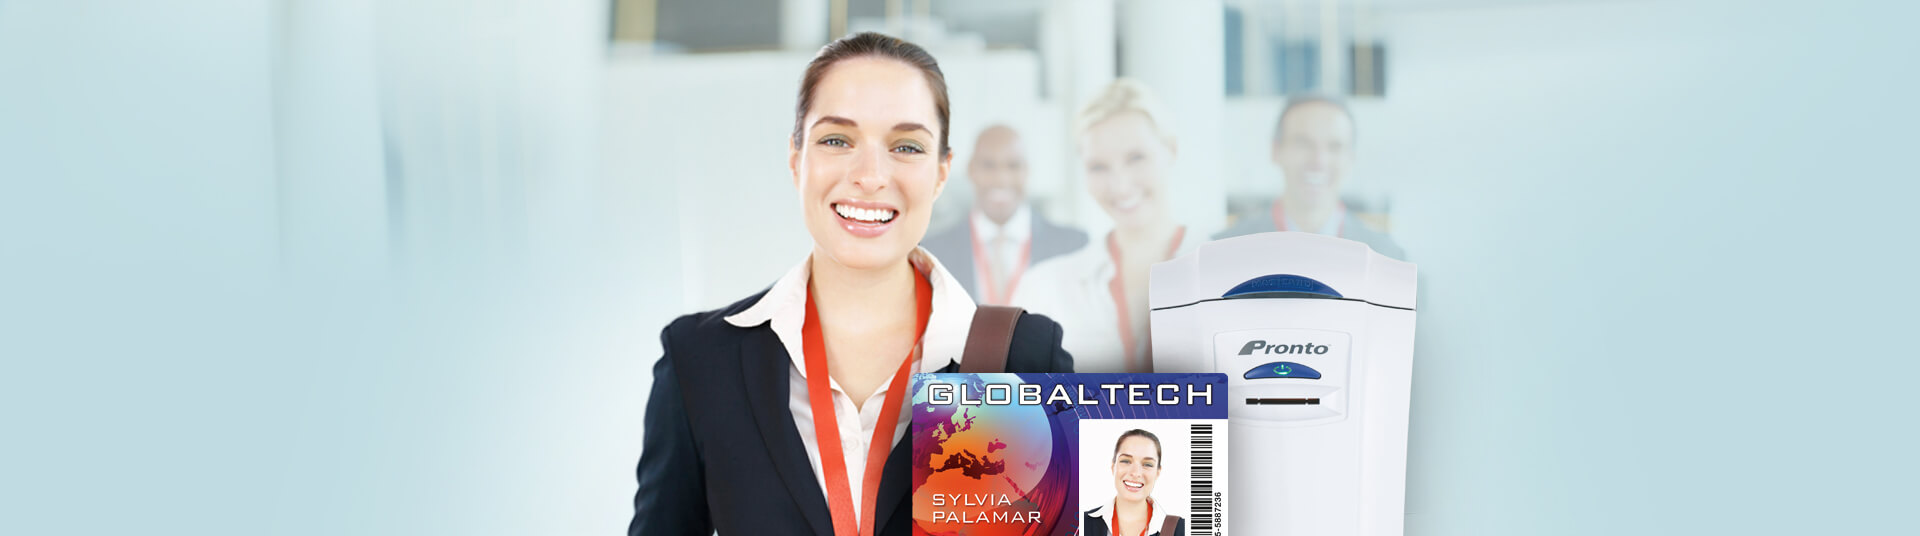 Employee Identification Systems